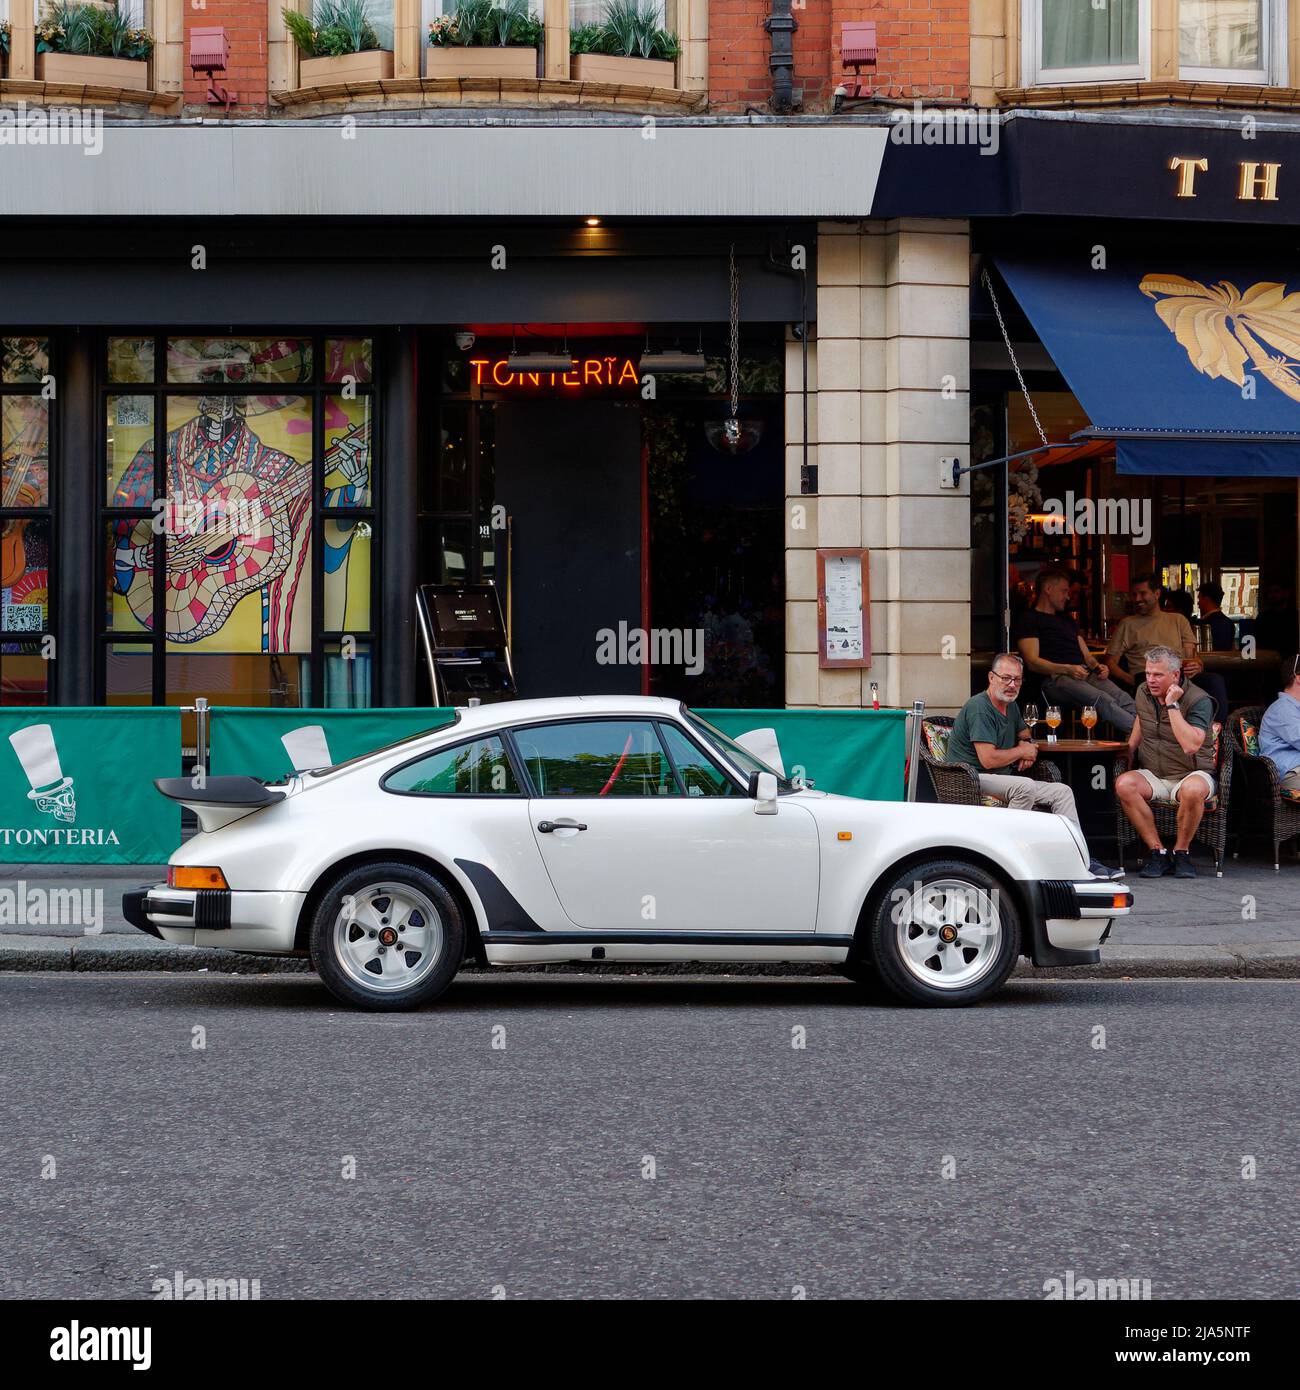 London, Greater London, England, May 14 2022: White Porsche 911 Carrera parked in Sloane Square Chelsea as people sit at a nearby bar or restaurant. Stock Photo